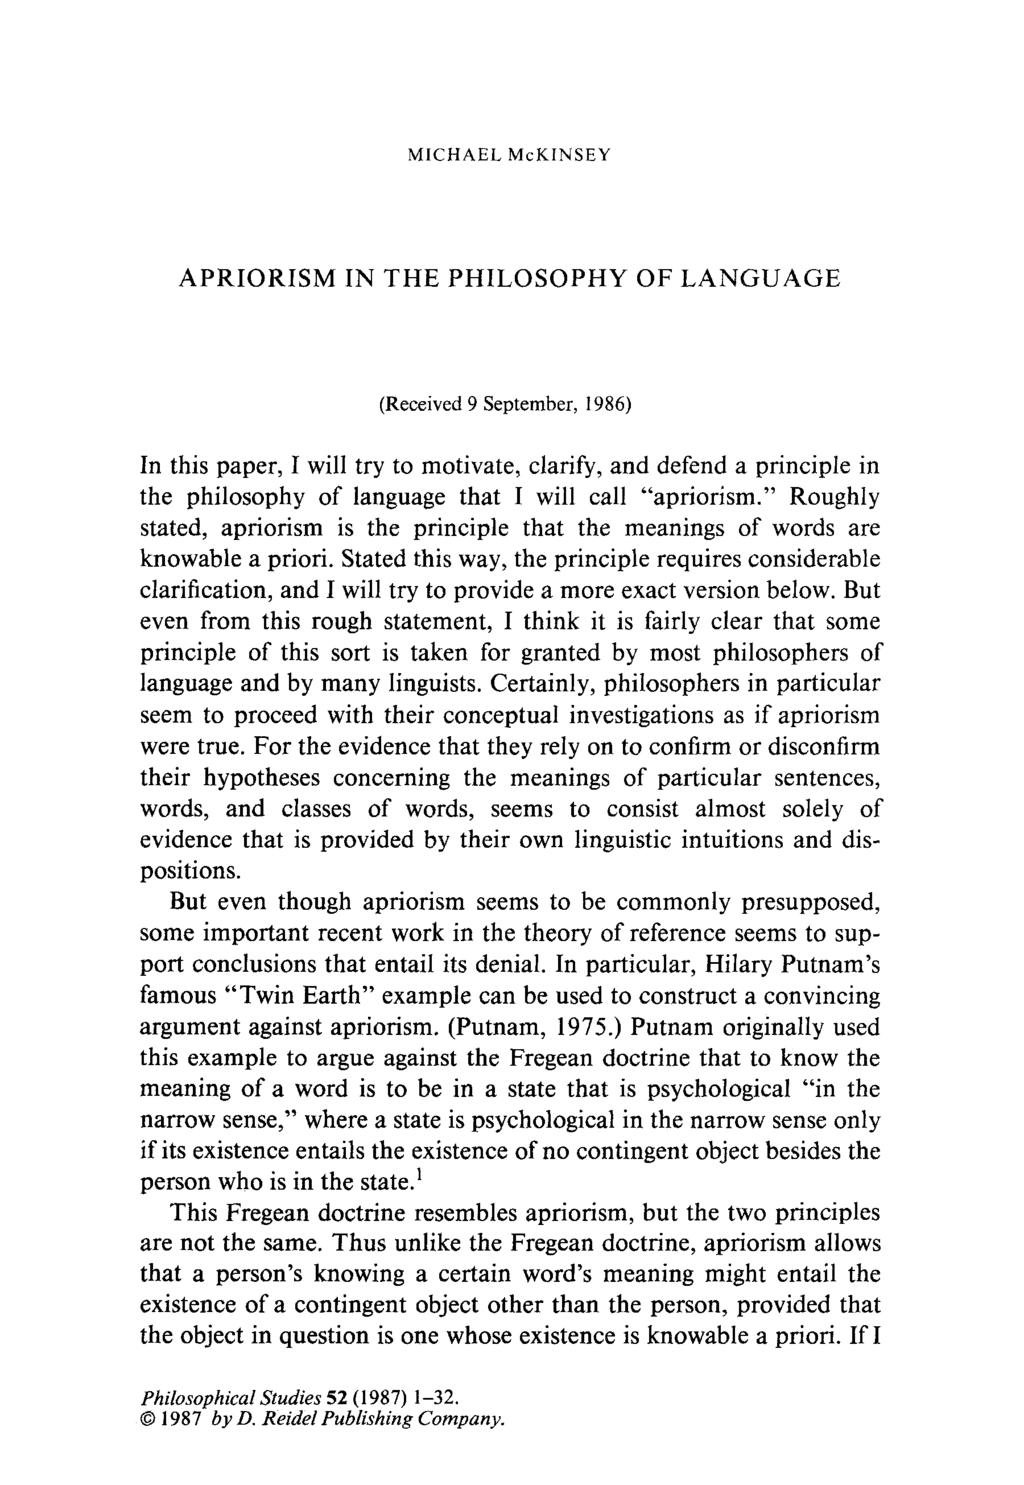 MICHAEL McKINSEY APRIORISM IN THE PHILOSOPHY OF LANGUAGE (Received 9 September, 1986) In this paper, I will try to motivate, clarify, and defend a principle in the philosophy of language that I will